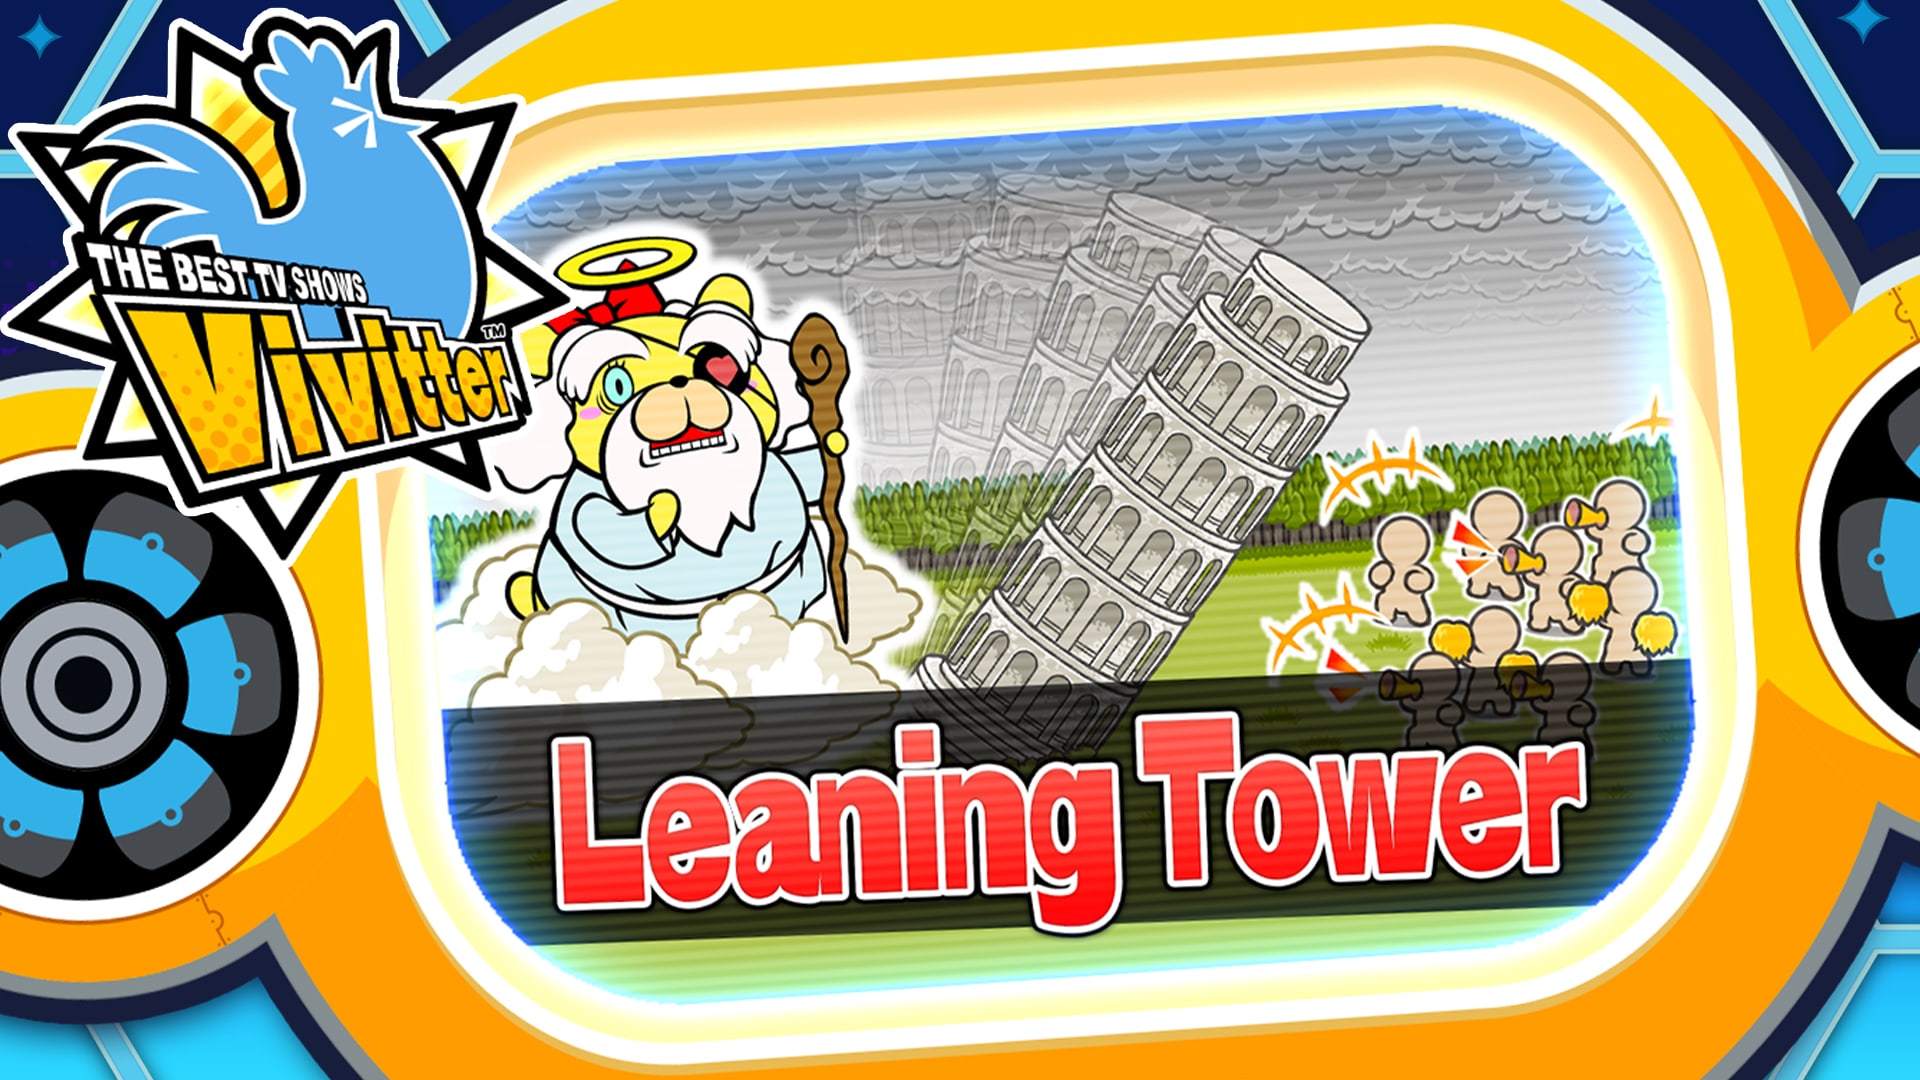 Additional mini-game "Leaning Tower"